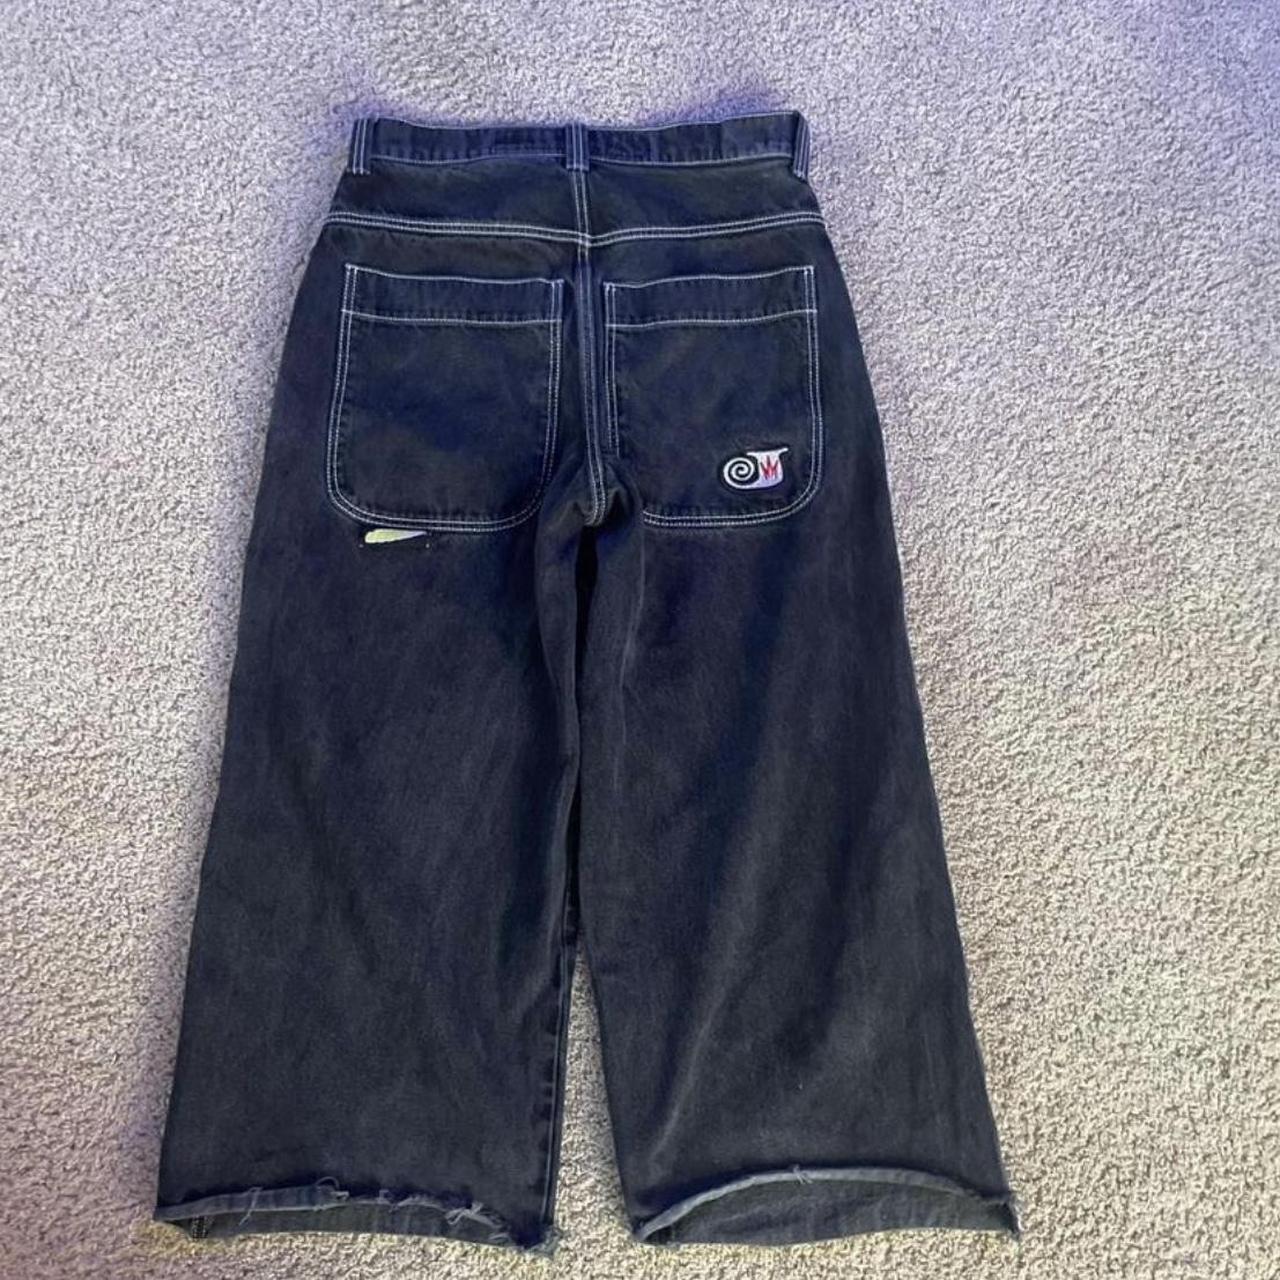 Jnco jeans 34/34